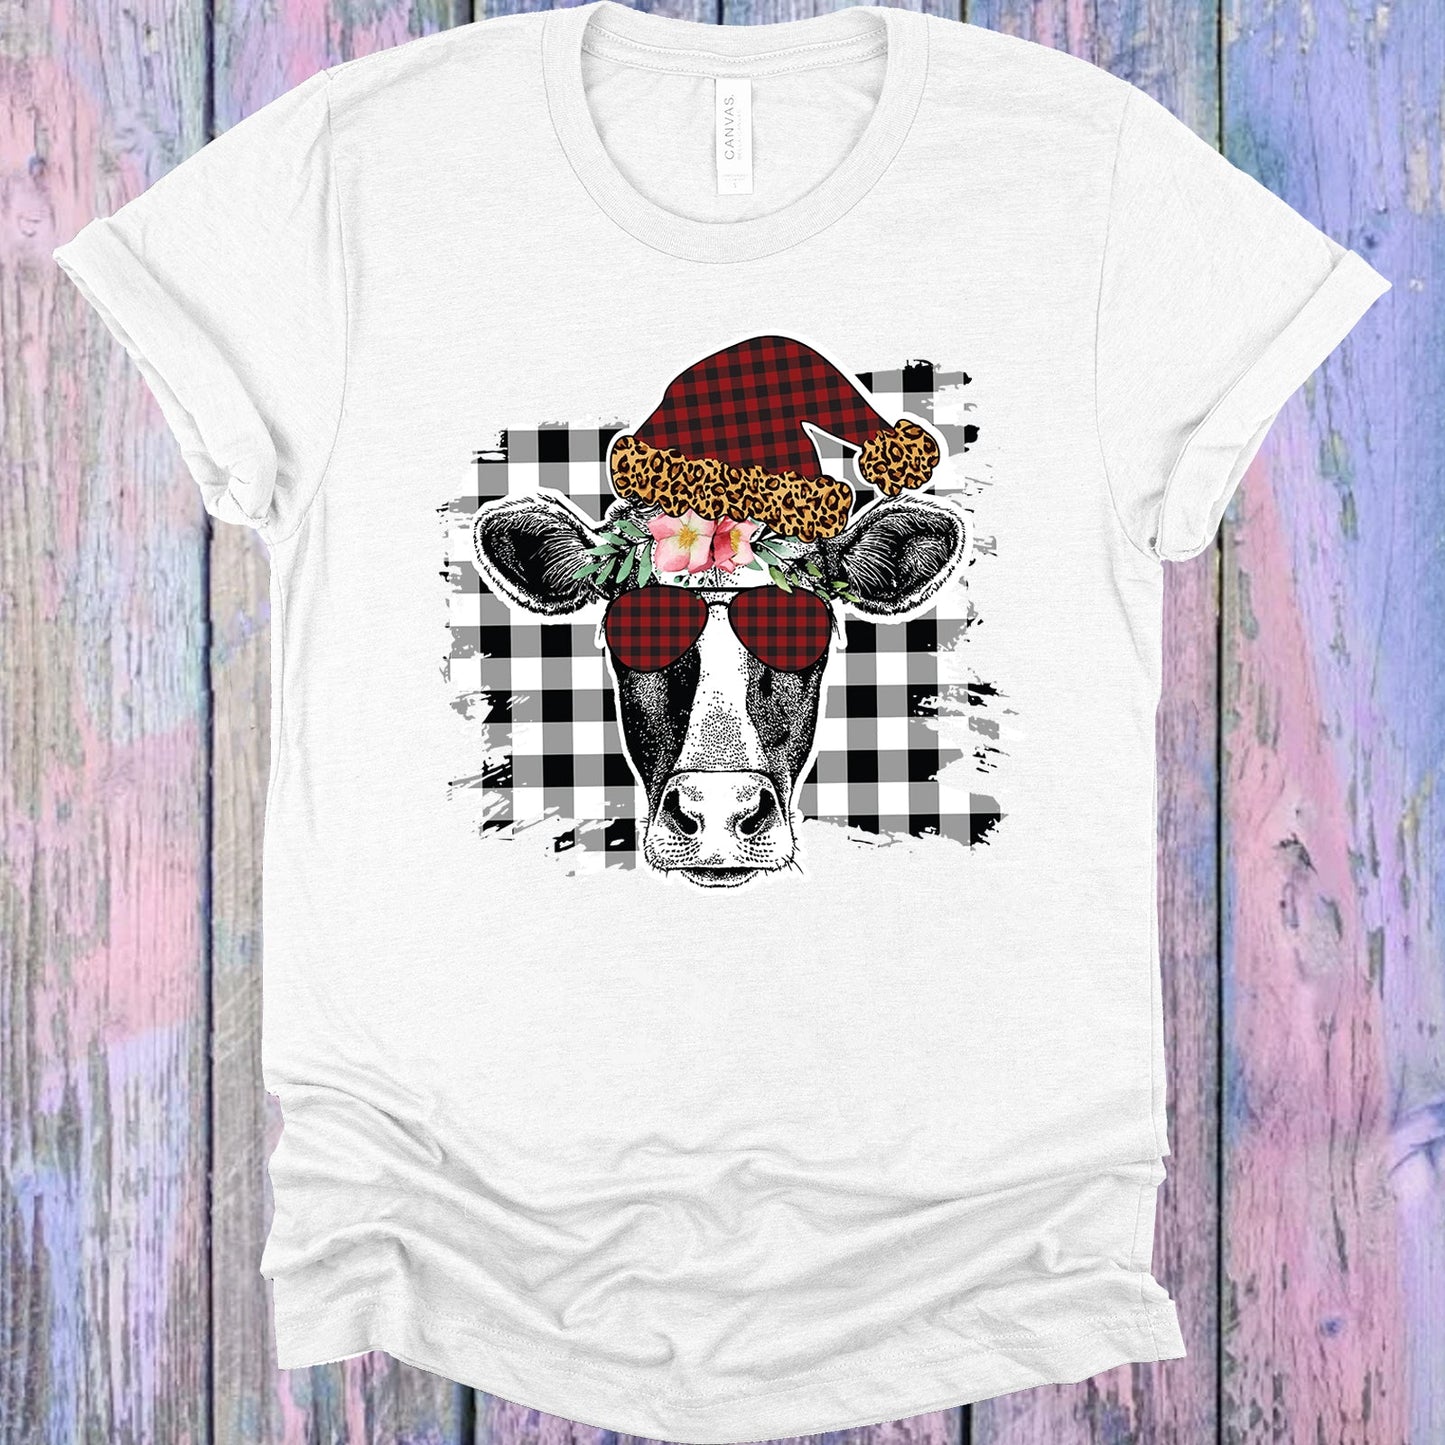 Winter Cow Graphic Tee Graphic Tee